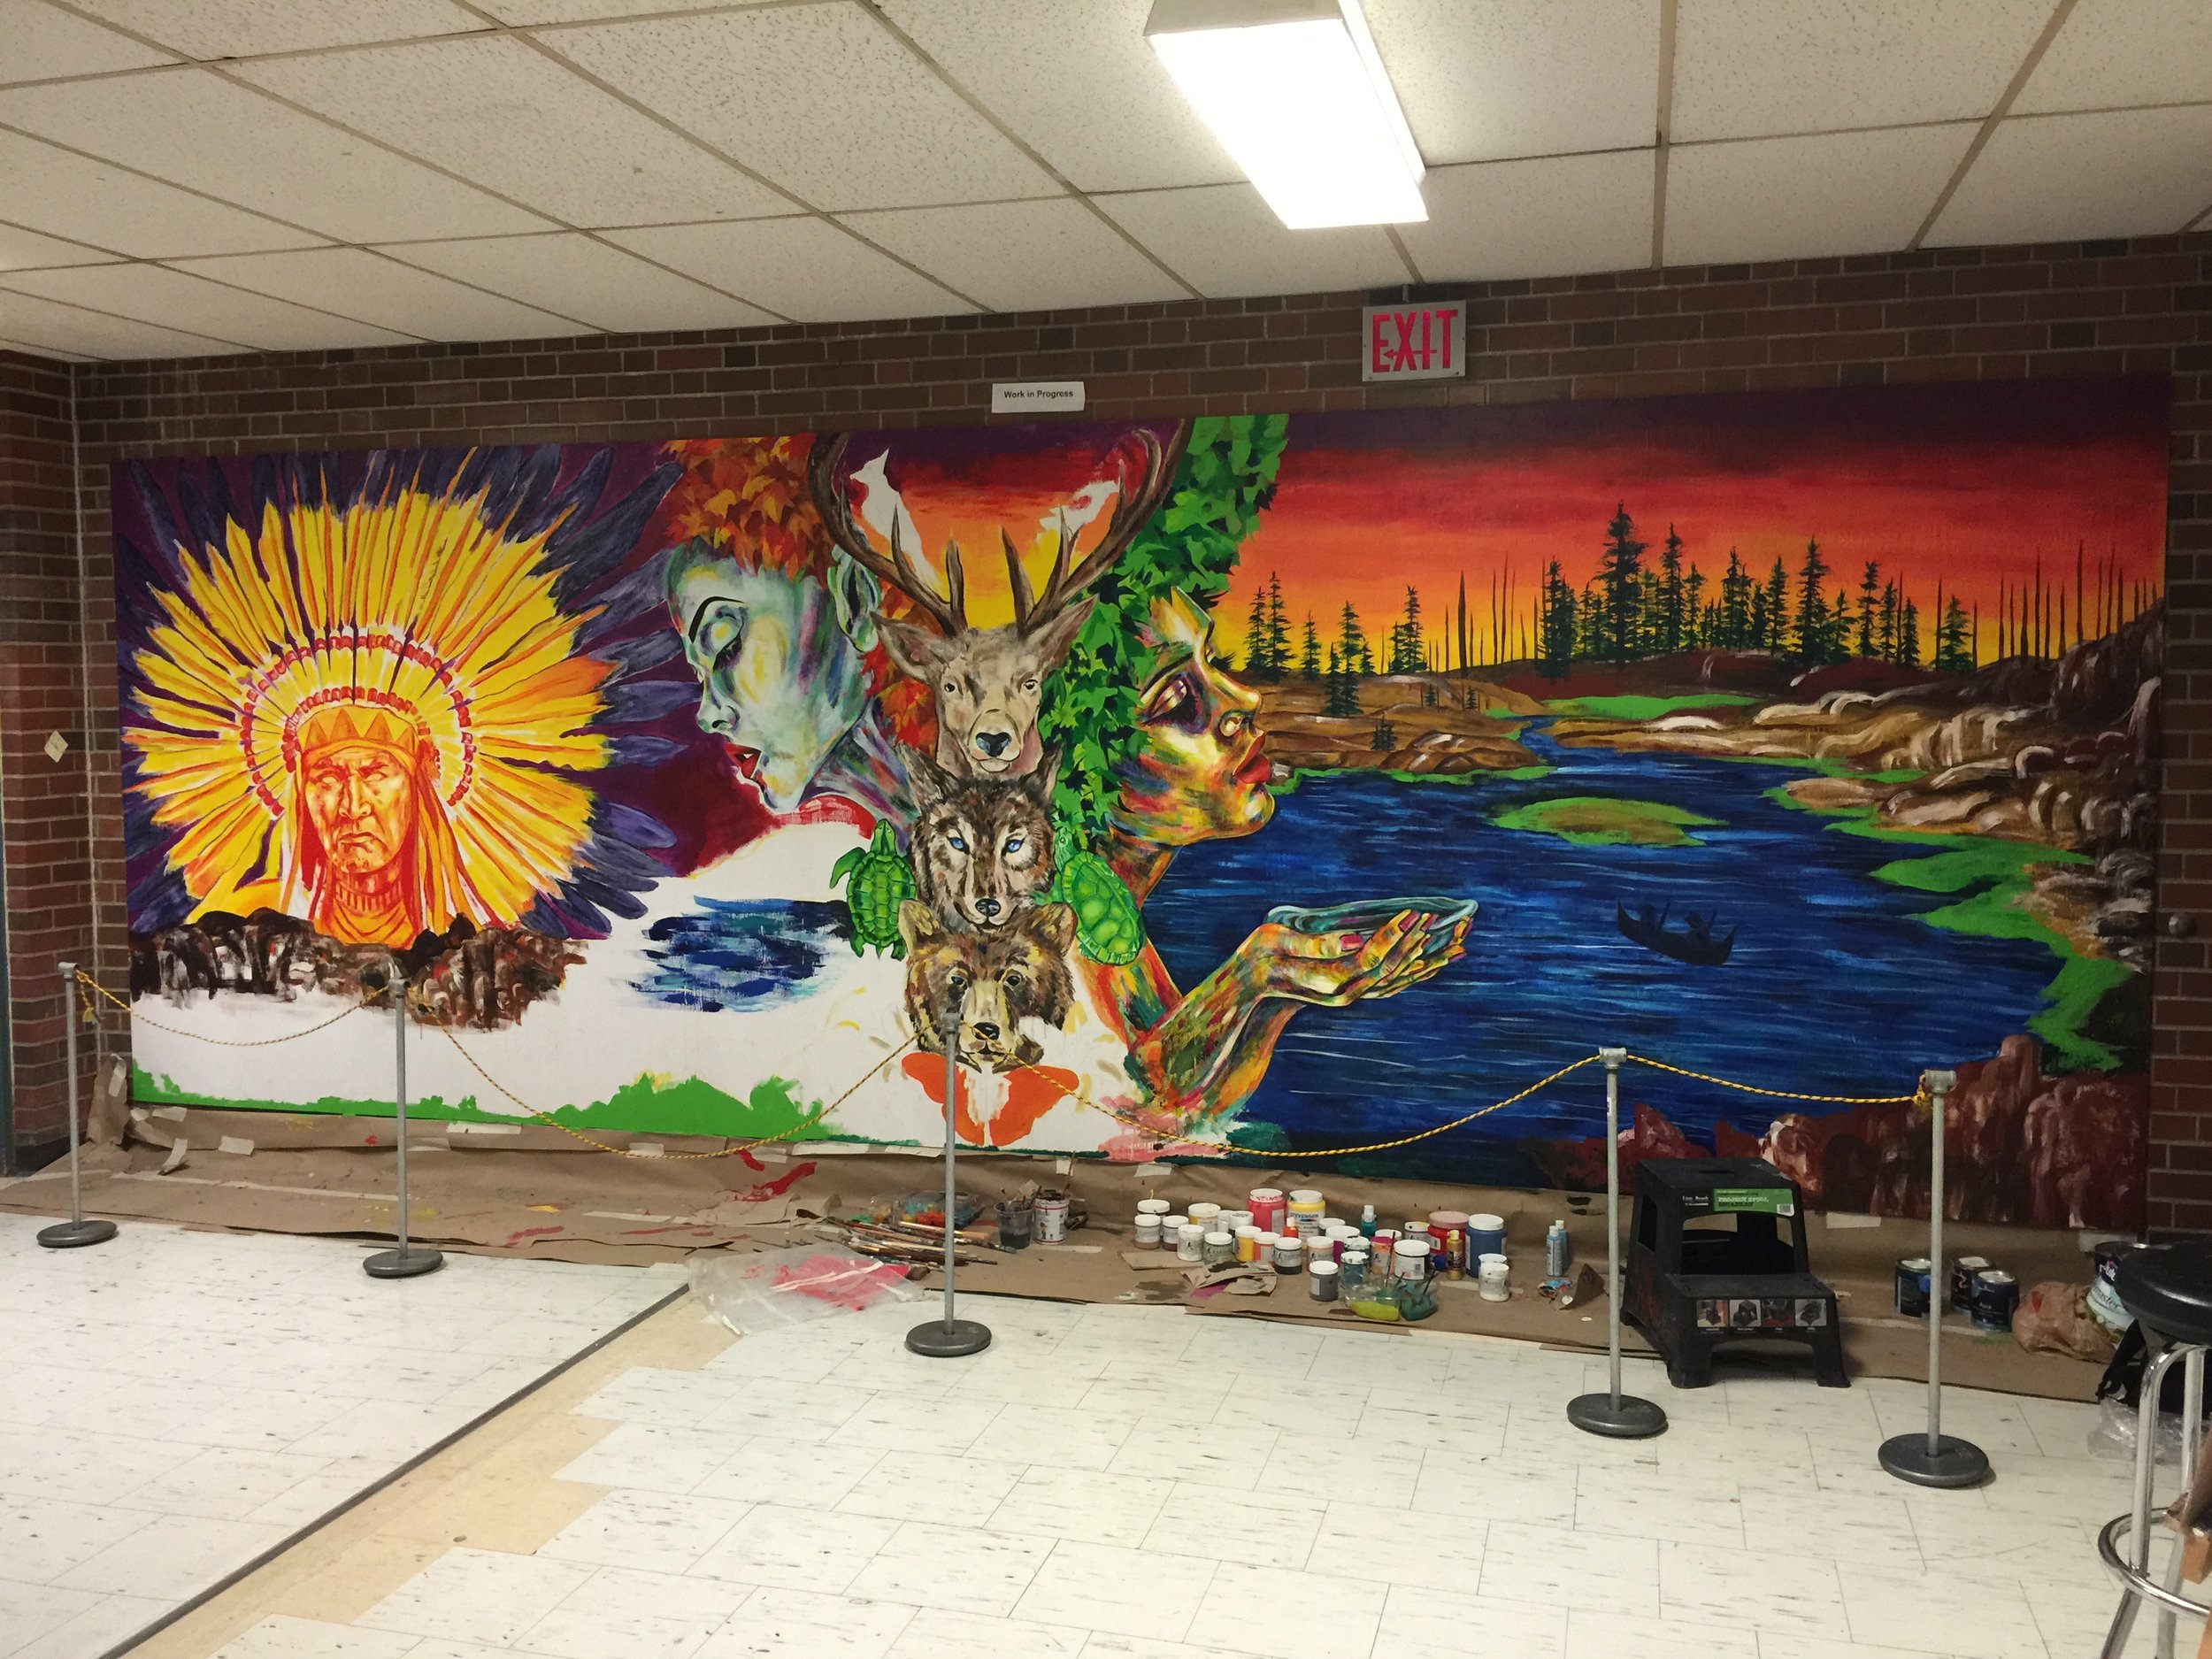  Jasmine Wemigwans, Special Series Visual &amp; Media Arts 2017 graduate, created a large mural for Wexford CSA which celebrates First Nations peoples and culture. 